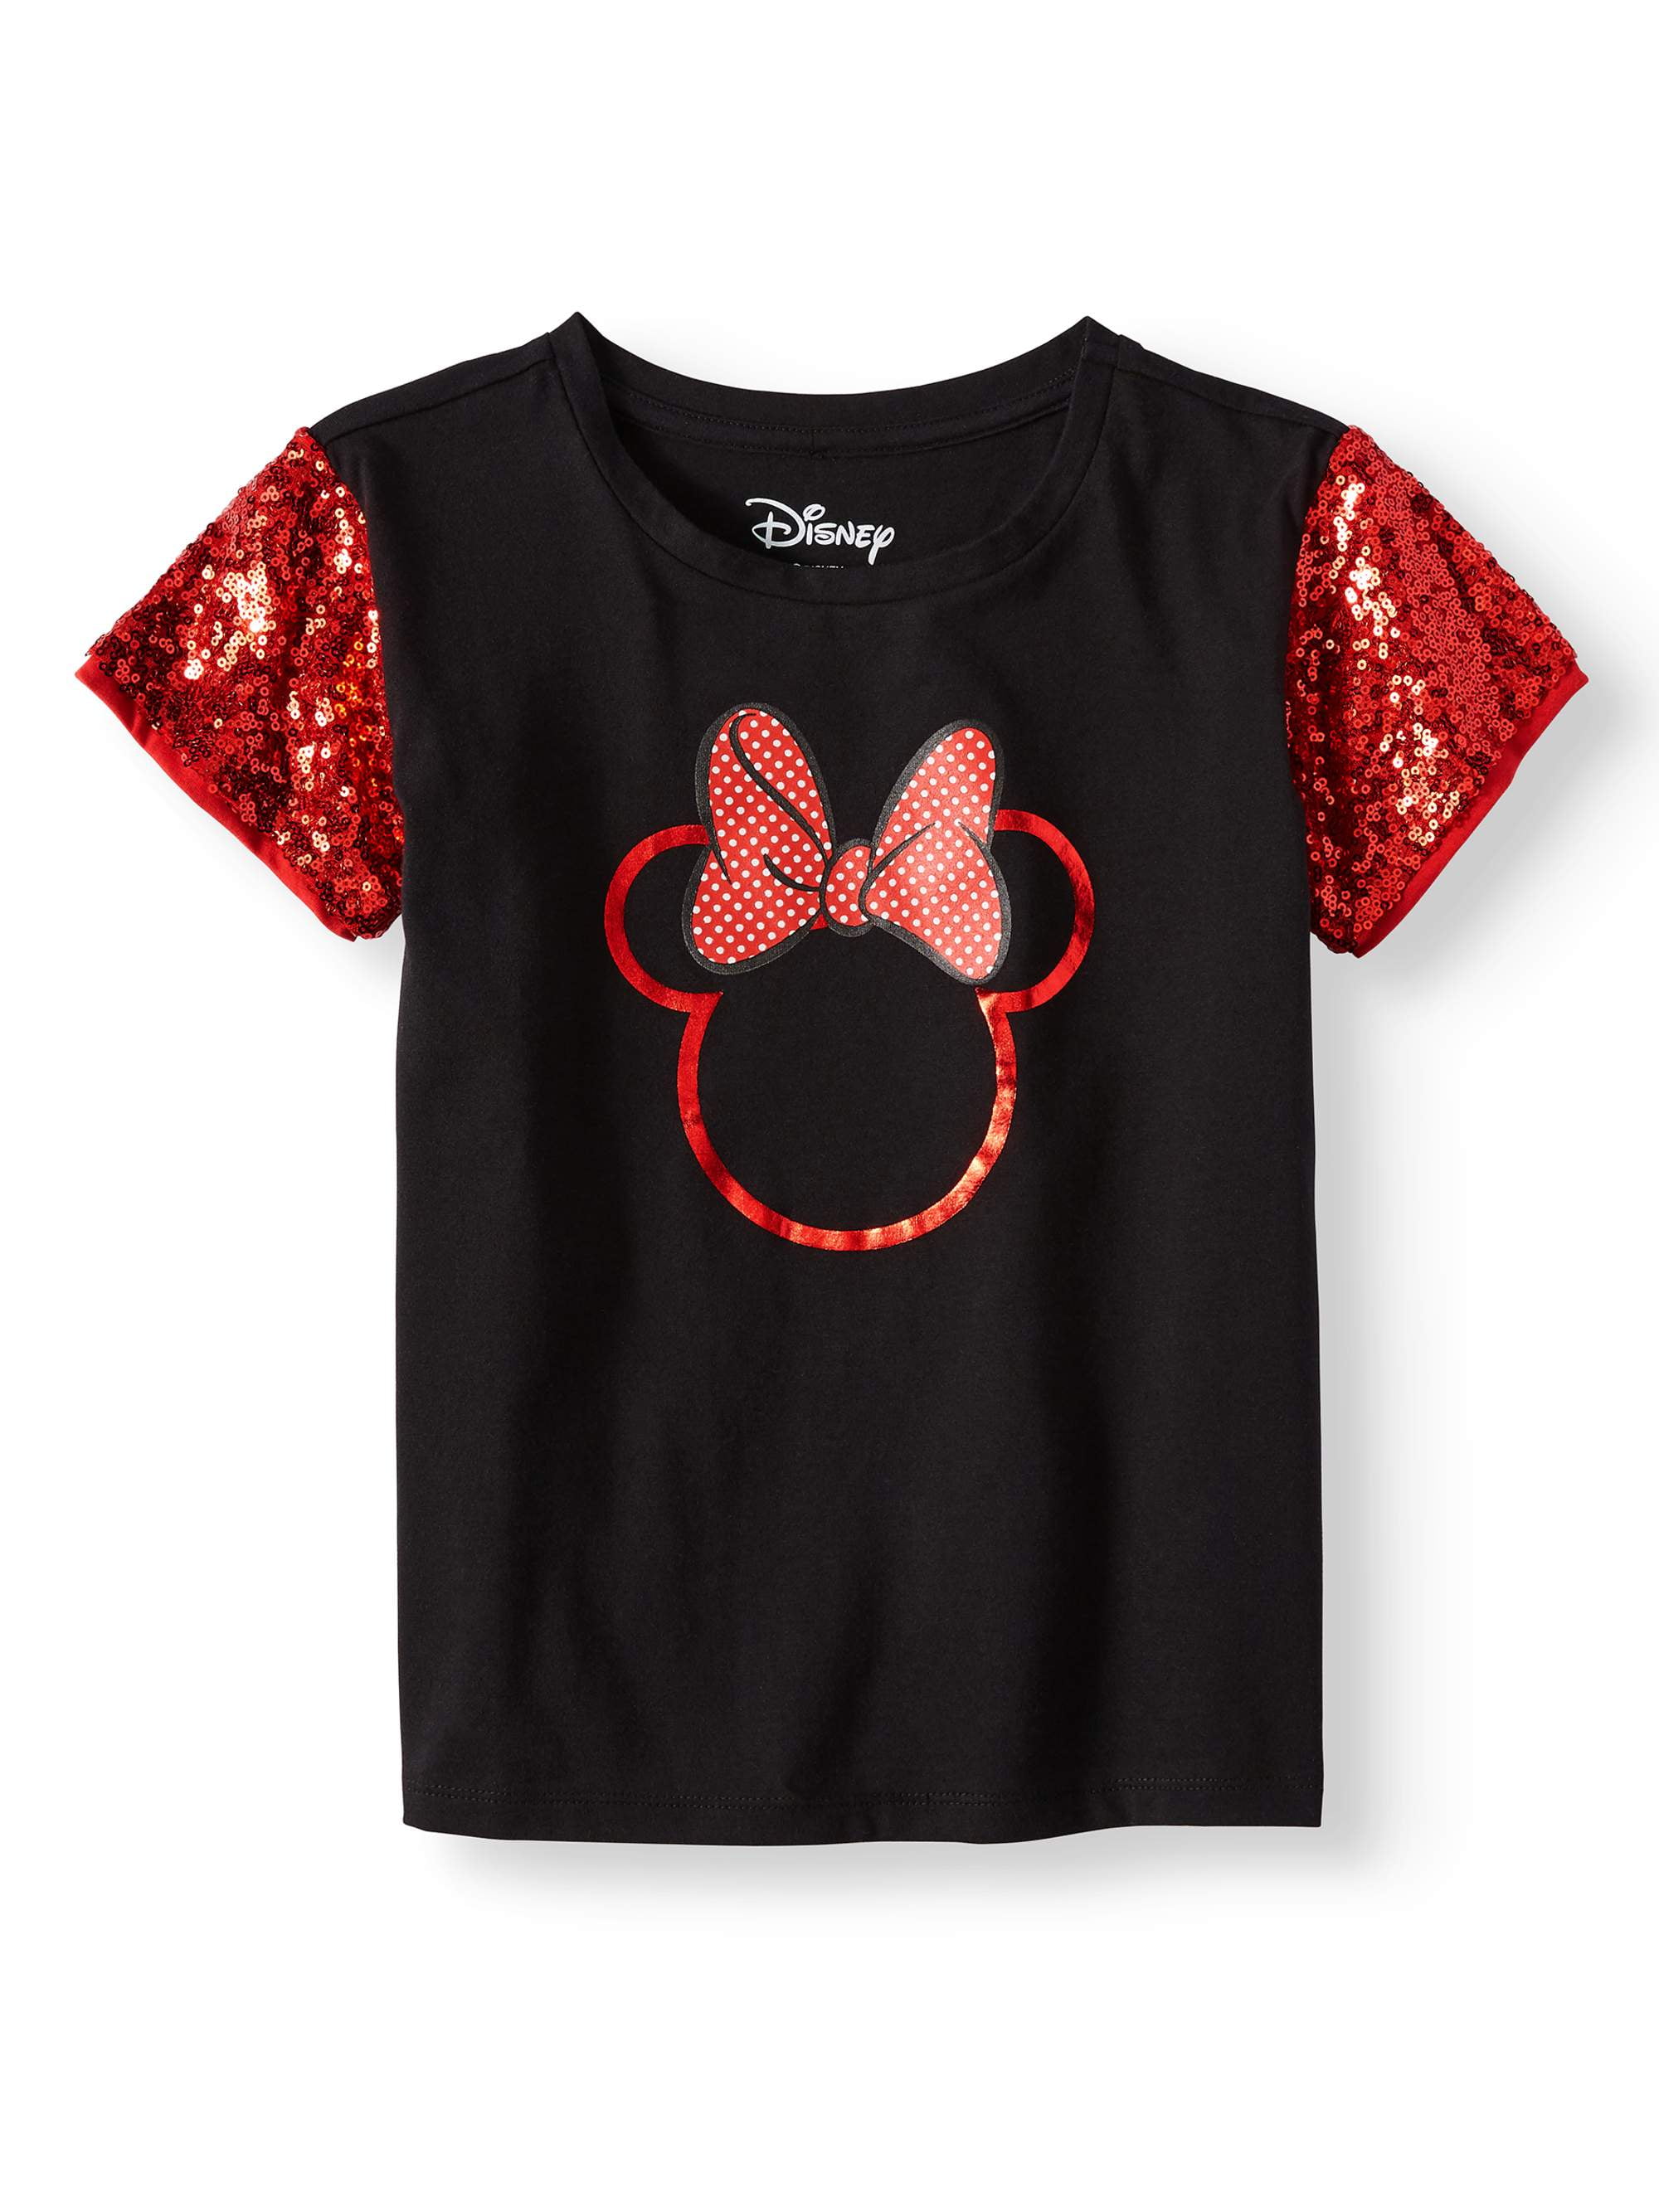 Disney Minnie Mickey Mouse 100% Cotton Glitter T-Shirts Tops 2-8 Years Bulky Set 